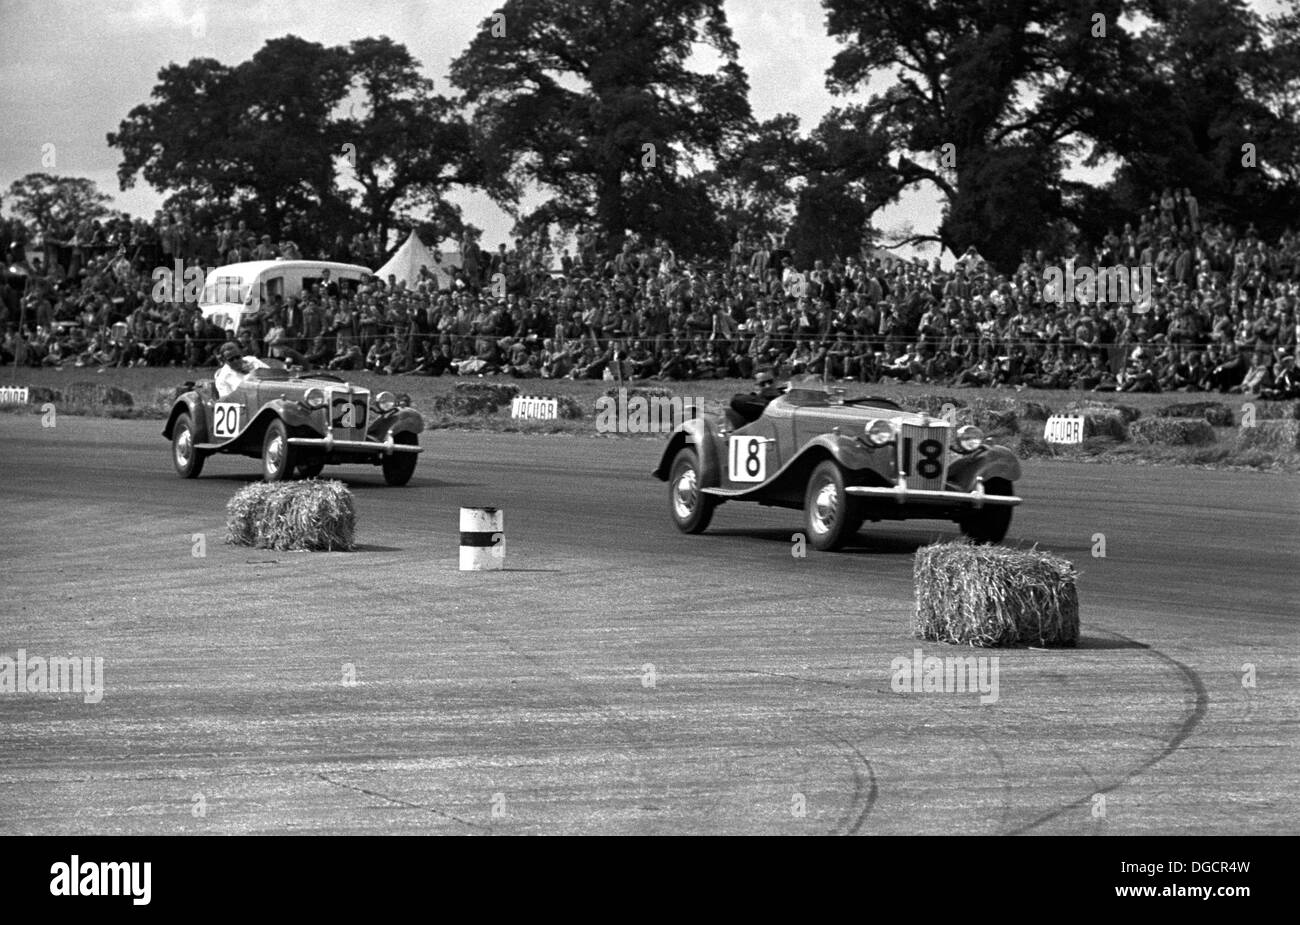 MG TCs racing in the International Trophy at Silverstone, England 1950. Stock Photo